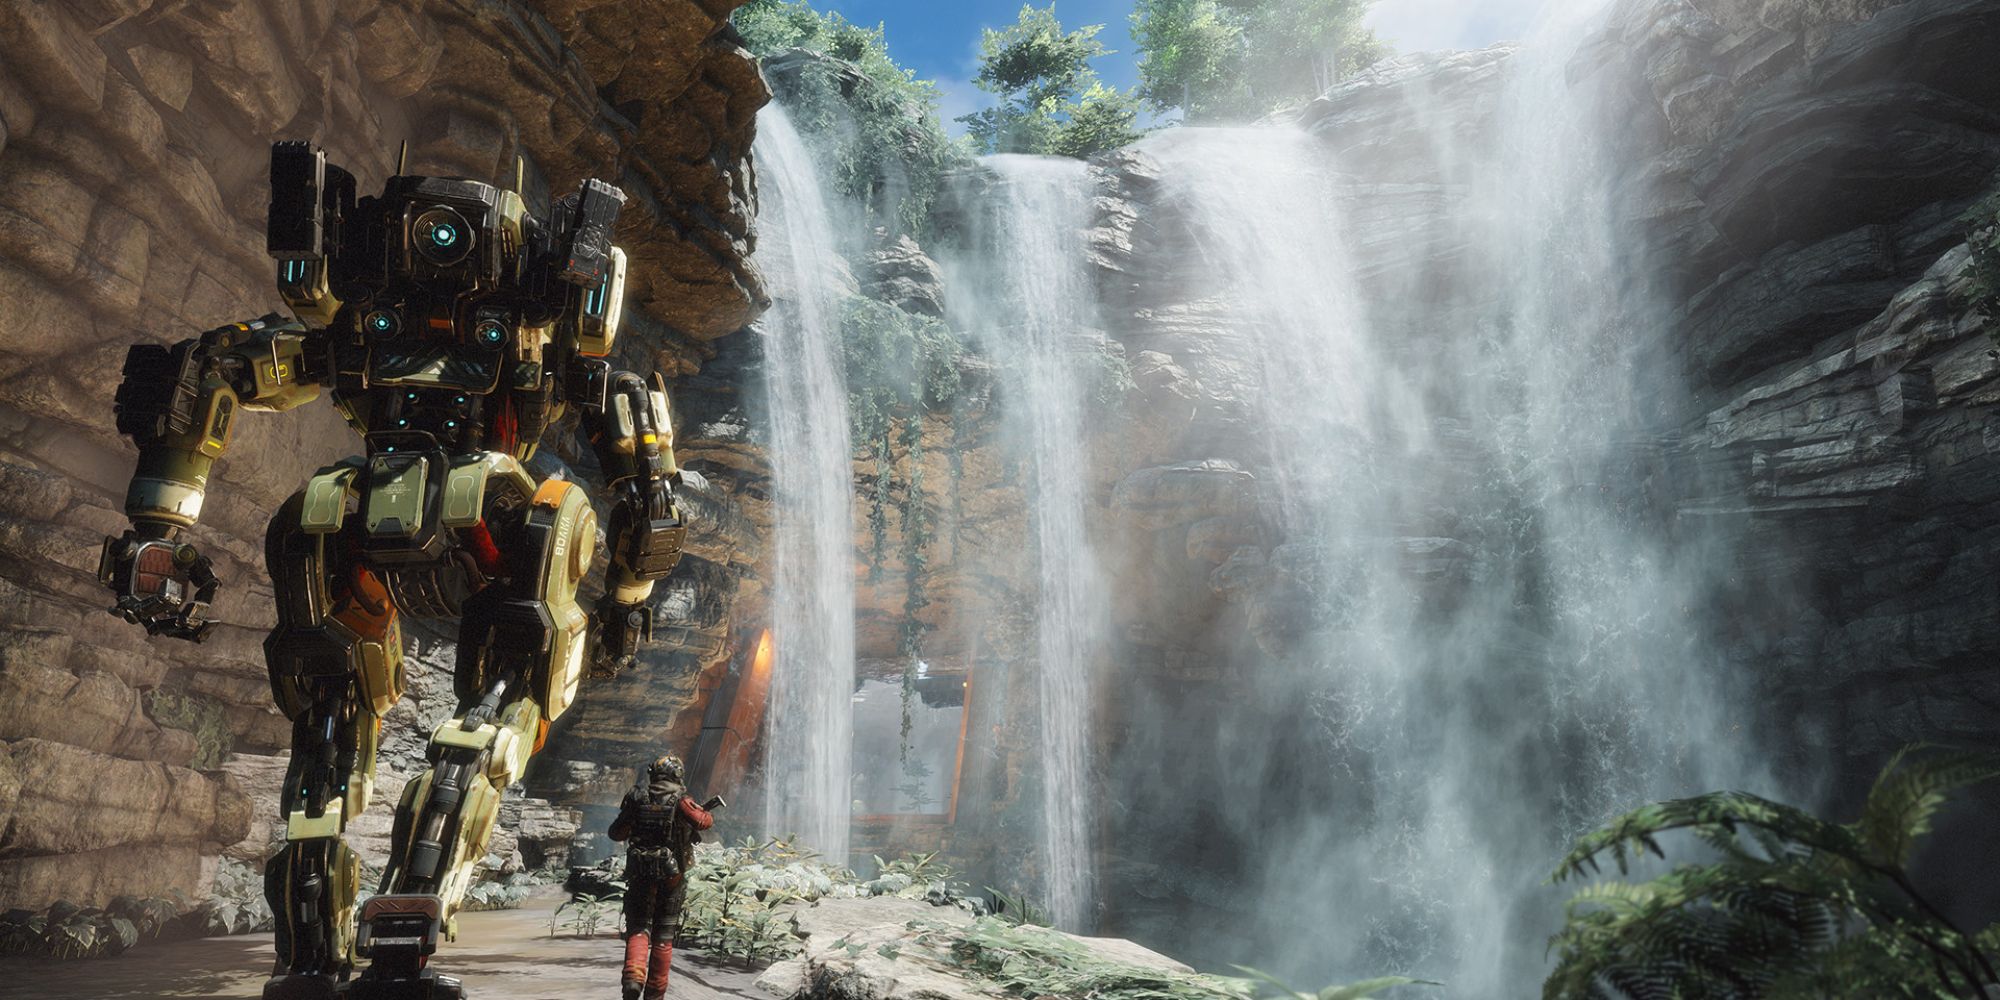 Robots In Video Games a wide shot of the towering green and yellow robot BT next to the protagonist of Titanfall 2 Jack Cooper on the far left walking towards a cascading waterfall on the right